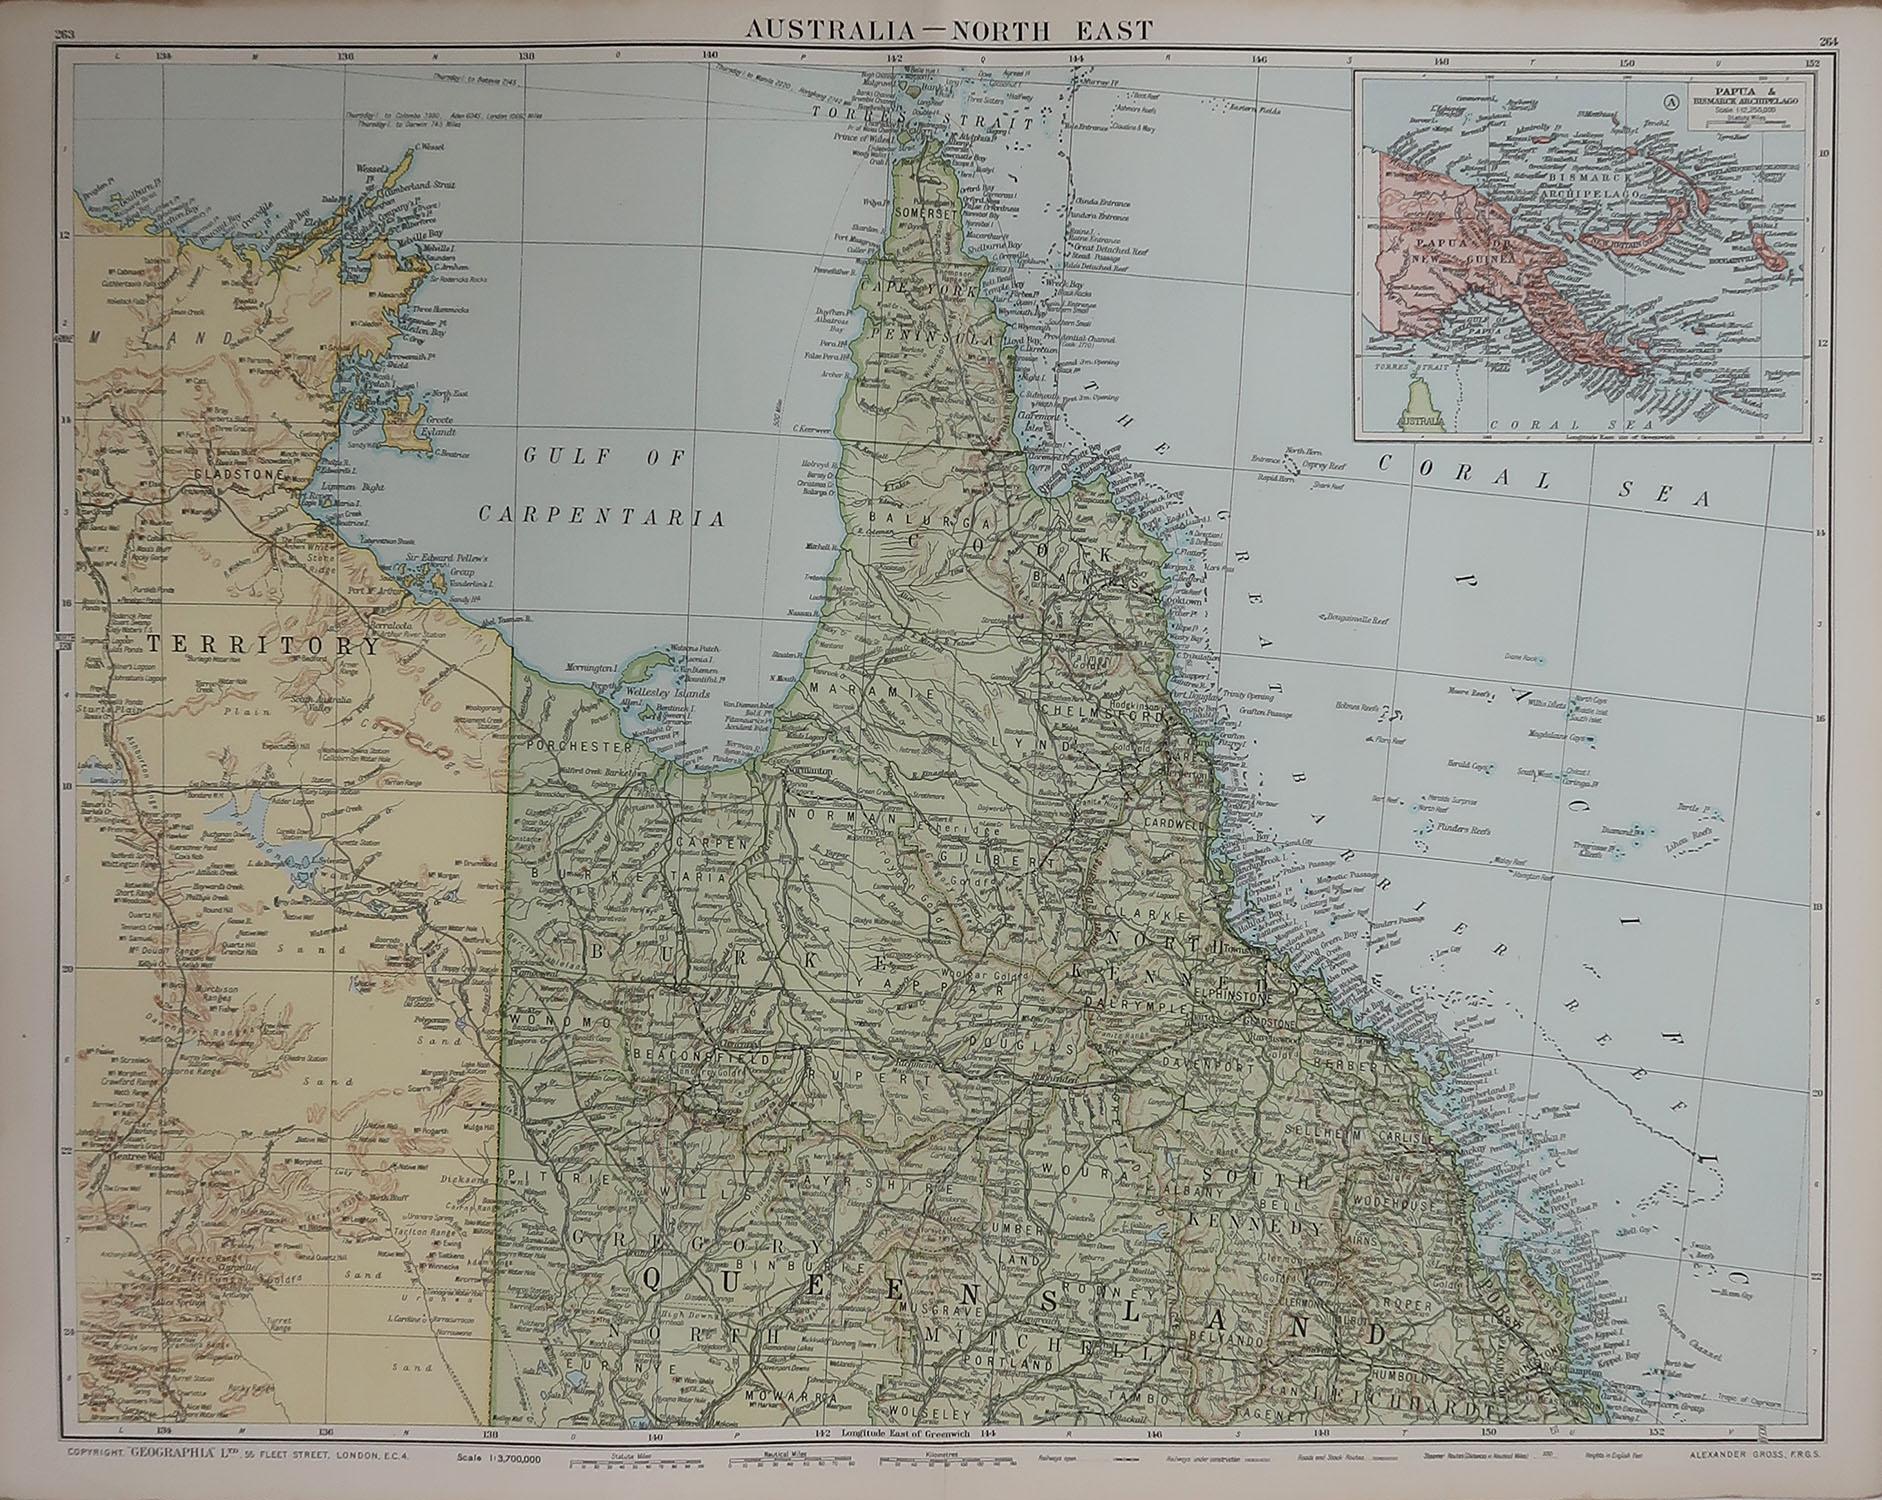 Great map of Queensland

Original color. 

Good condition 

Published by Alexander Gross

Unframed.








